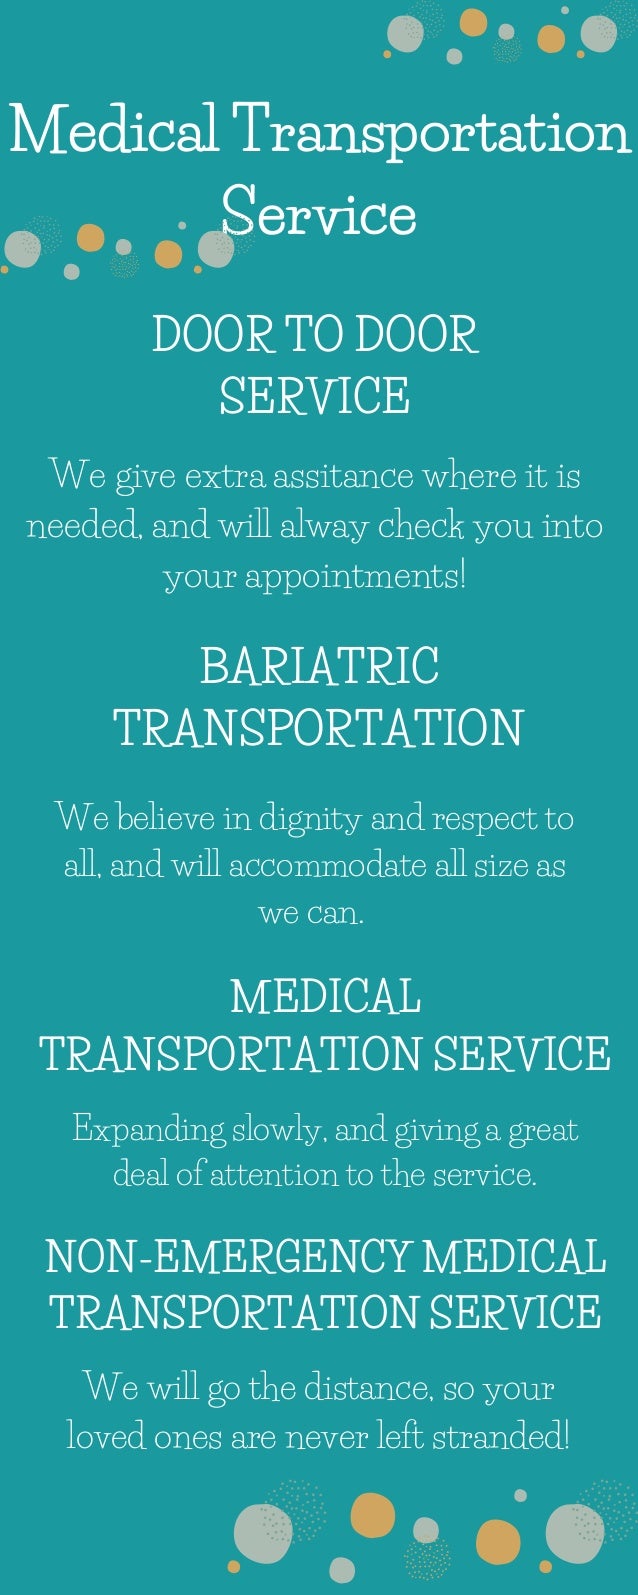 Medical Transportation
Service
DOOR TO DOOR
SERVICE
BARIATRIC
TRANSPORTATION
MEDICAL
TRANSPORTATION SERVICE
NON-EMERGENCY MEDICAL
TRANSPORTATION SERVICE
We give extra assitance where it is
needed, and will alway check you into
your appointments!
We believe in dignity and respect to
all, and will accommodate all size as
we can.
Expanding slowly, and giving a great
deal of attention to the service.
We will go the distance, so your
loved ones are never left stranded!
 